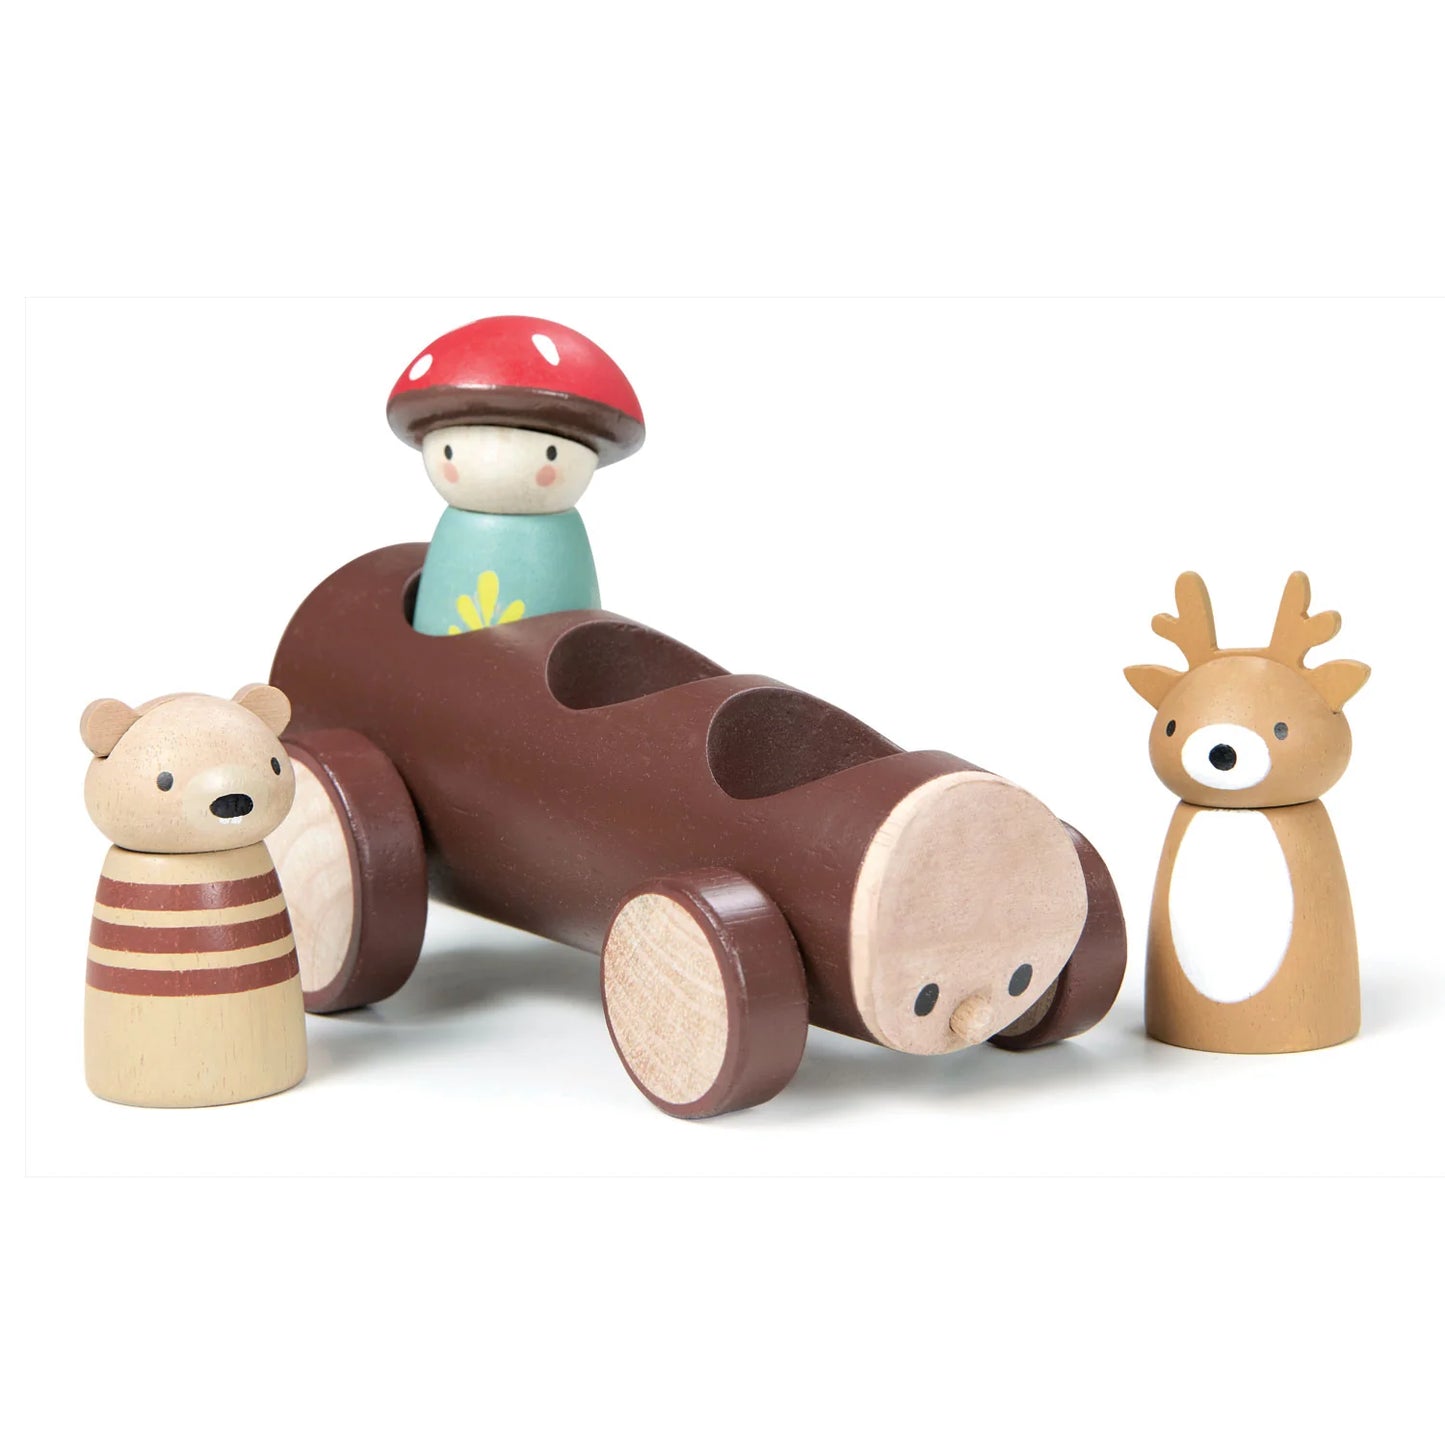 Timber Taxi by Tender Leaf Toys